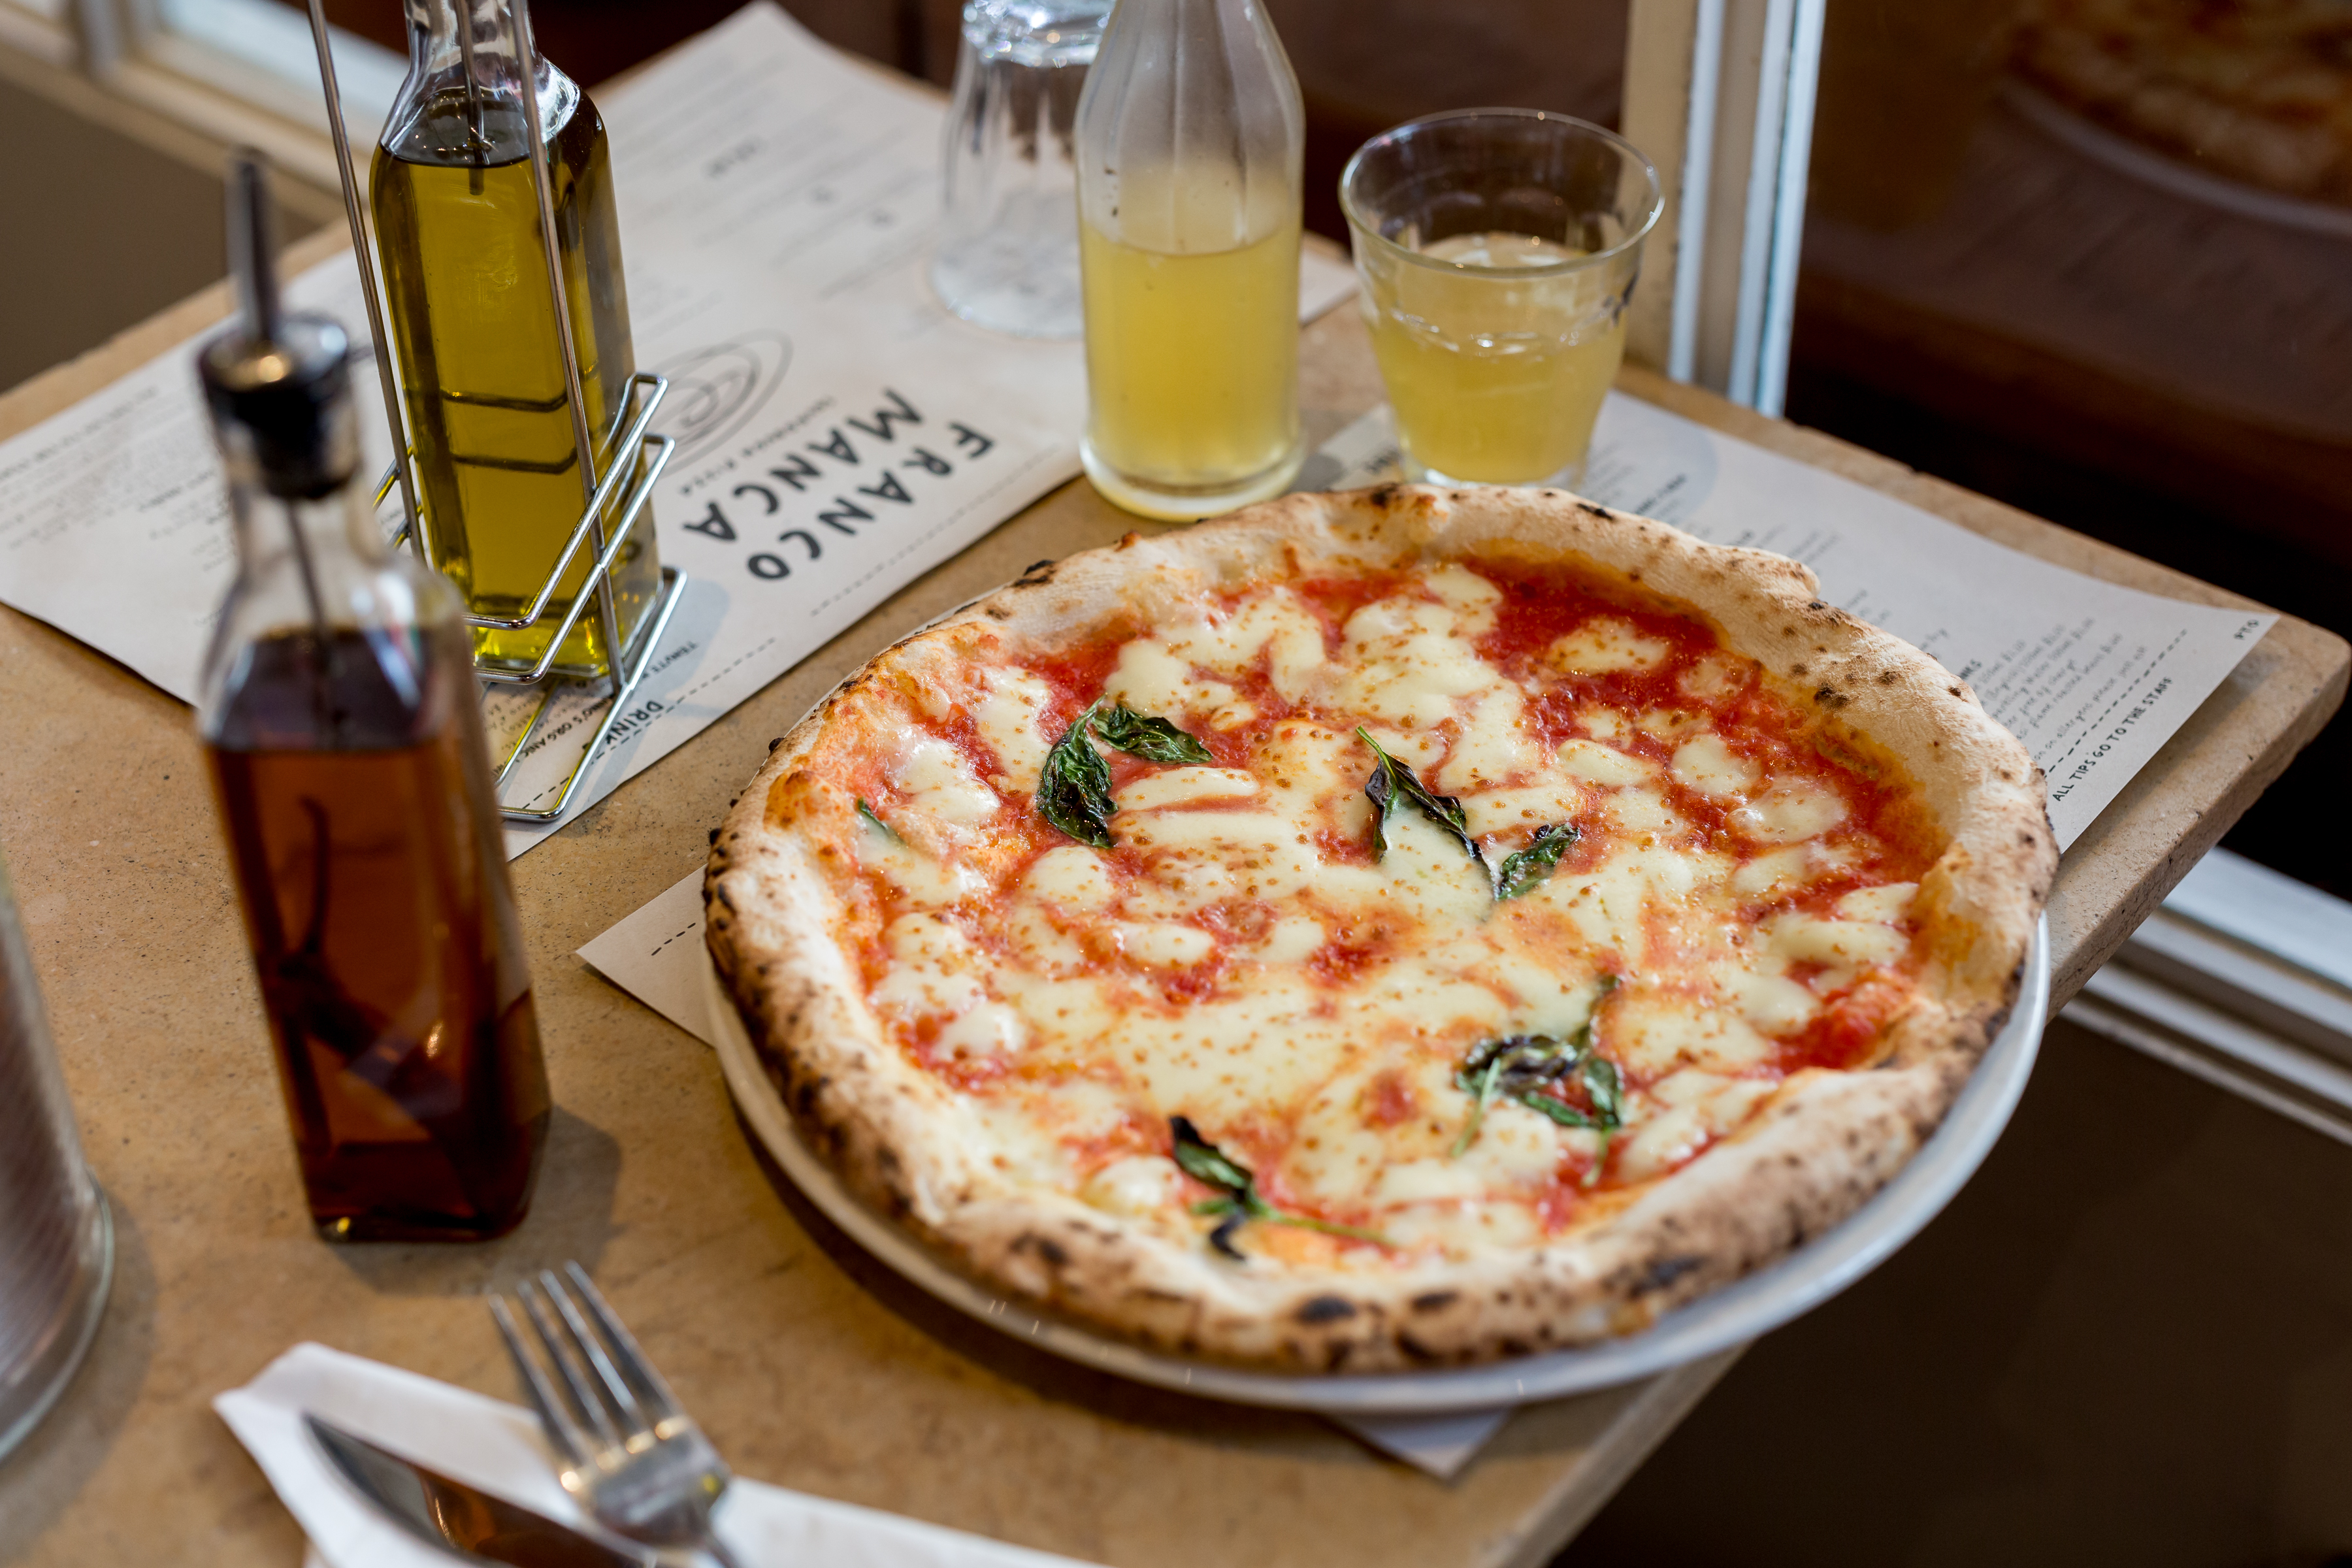 Pizza at Franco Manca, soon to open a new london restaurant